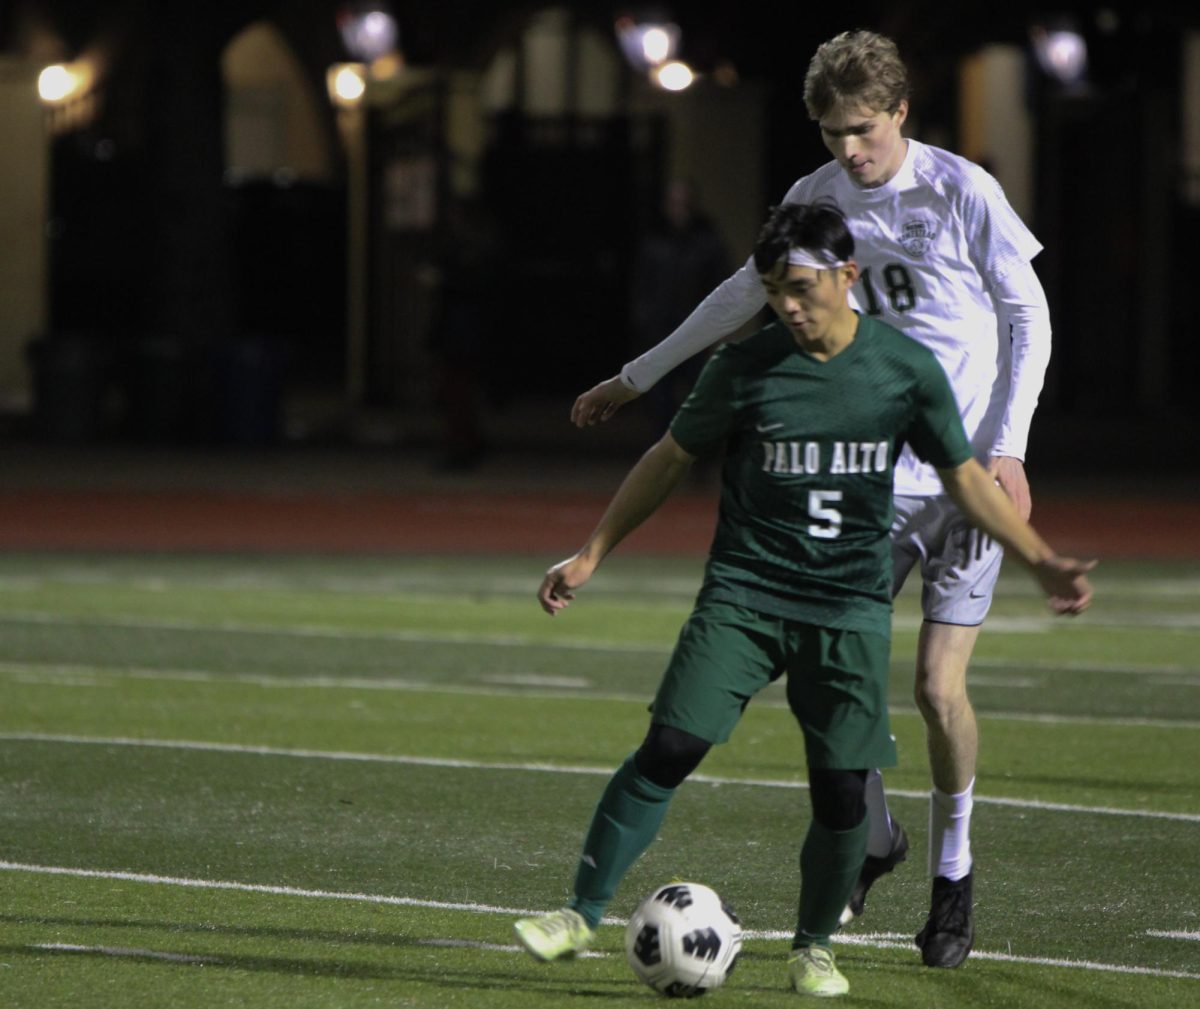 Palo+Alto+High+School+Viking+senior++midfielder+Richard+Ogawa+defends+the+ball+from+a+Homestead+High+School+Mustangs+defender+during+the+boys+varsity+soccer+game+on+Tuesday.+The+Vikings+defeated+the+Mustangs%2C+4-0%2C++keeping+their+chance+to+qualify+for+the+Central+Coast+Championship+alive.+According+to+Mustang+head+coach+Adam+Clarke%2C+both+teams+were+extra+eager+to+win+given+what+was+at+stake.+%E2%80%9CTonight+was+brutal%2C+Clarke+said.+We+needed+to+win+to+make+the+playoffs%2C+and+we+also+knew+that+Paly+also+had+to+win.+There+was+a+lot+at+stake+coming+into+the+match%E2%80%9D.+%28Photo%3A+Joy+Tan%29